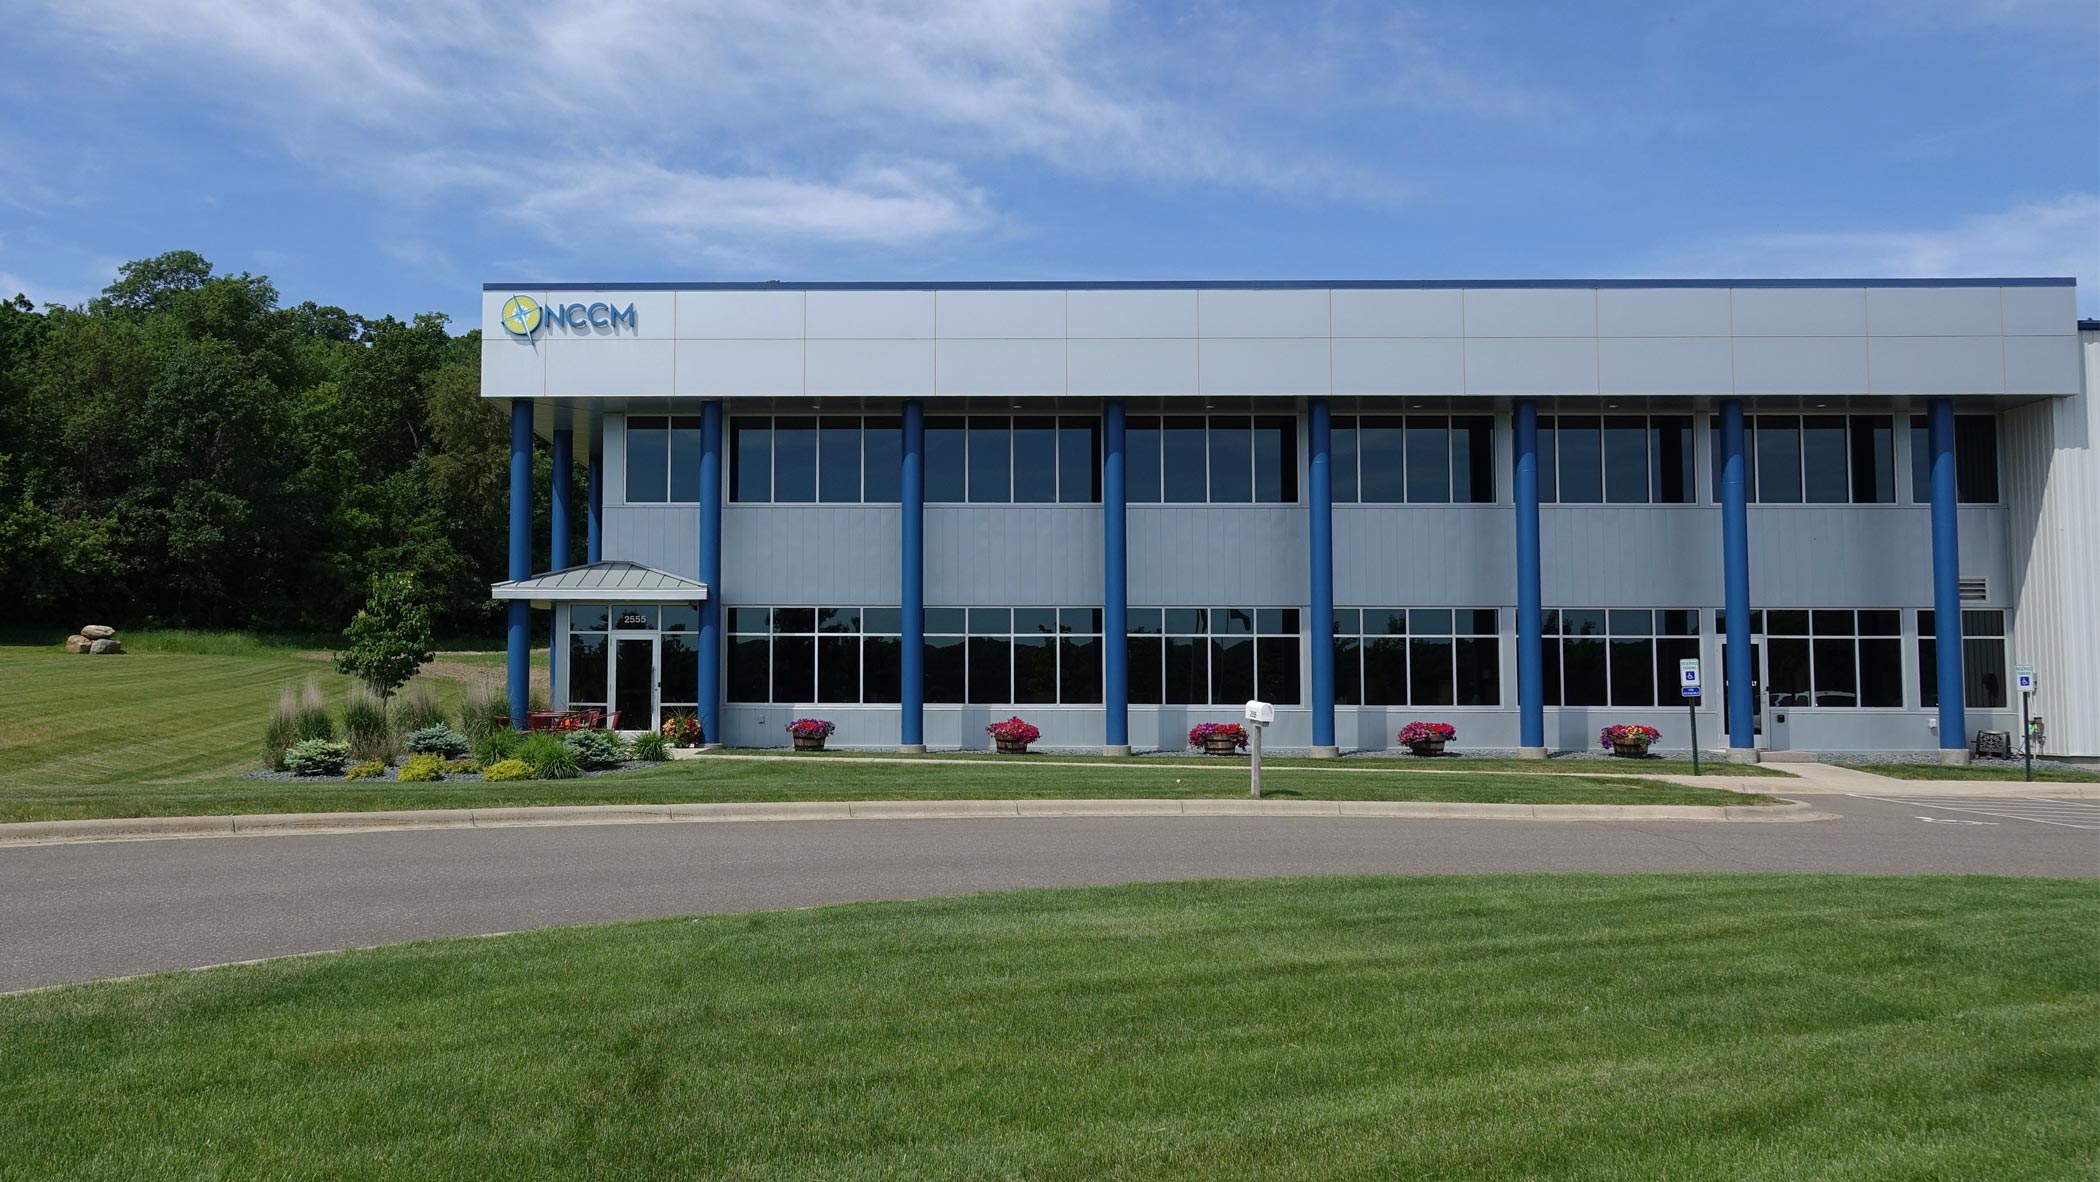 Front view of NCCM Company headquarters during a beautiful summer day